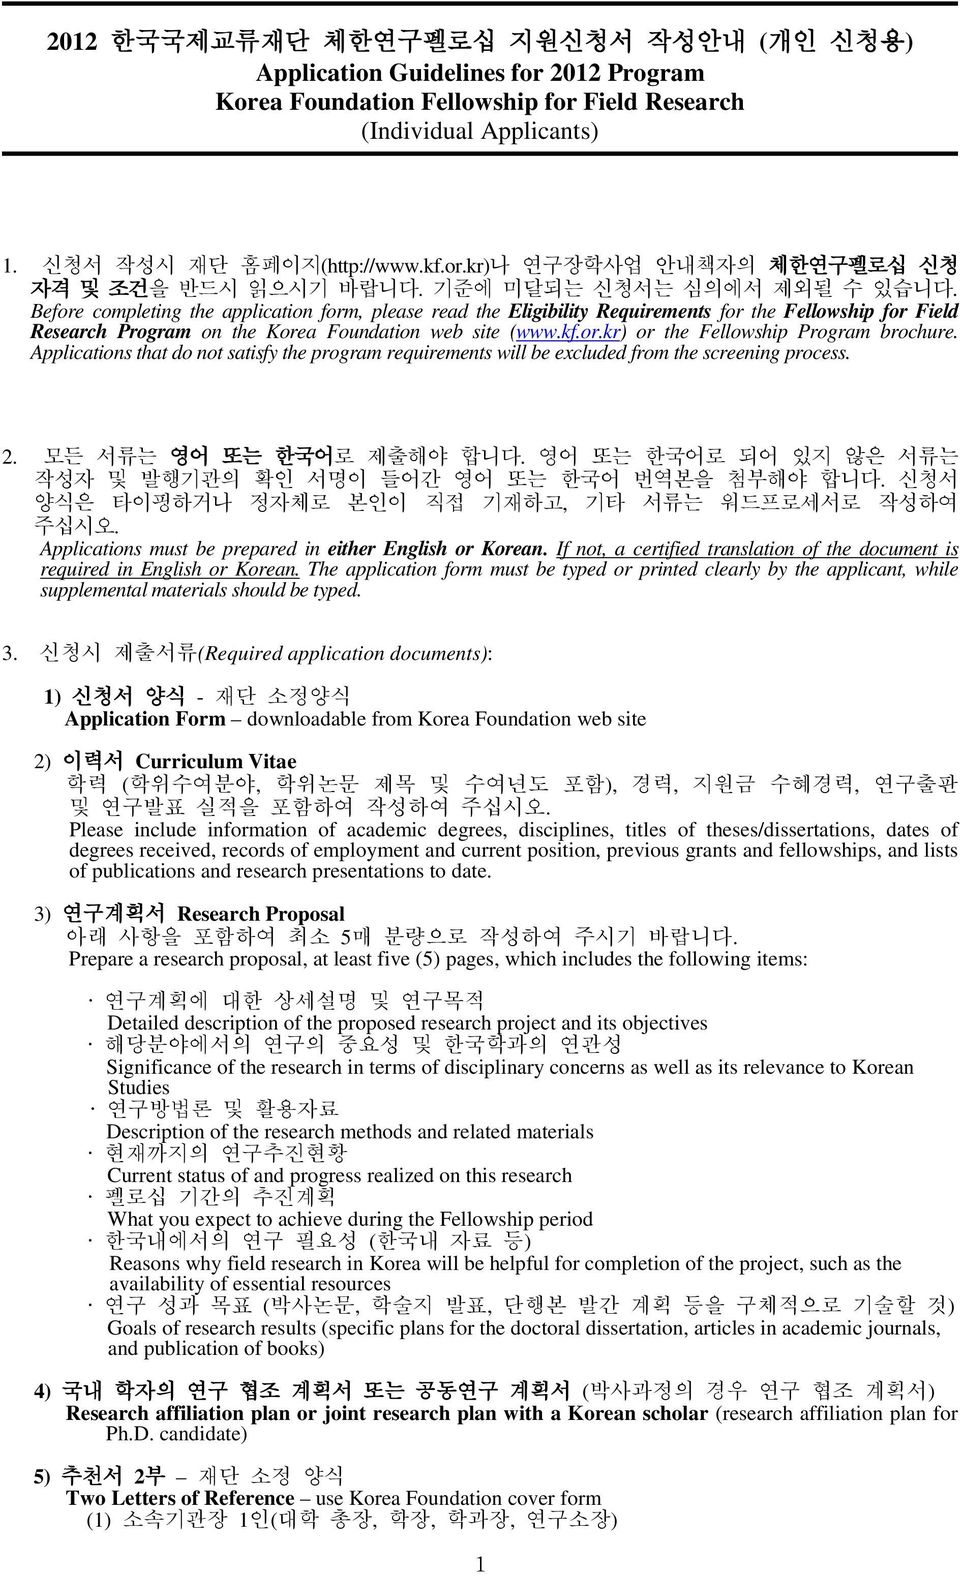 or.kr) or the Fellowship Program brochure. Applications that do not satisfy the program requirements will be excluded from the screening process. 2. 모든 서류는 영어 또는 한국어로 제출해야 합니다.